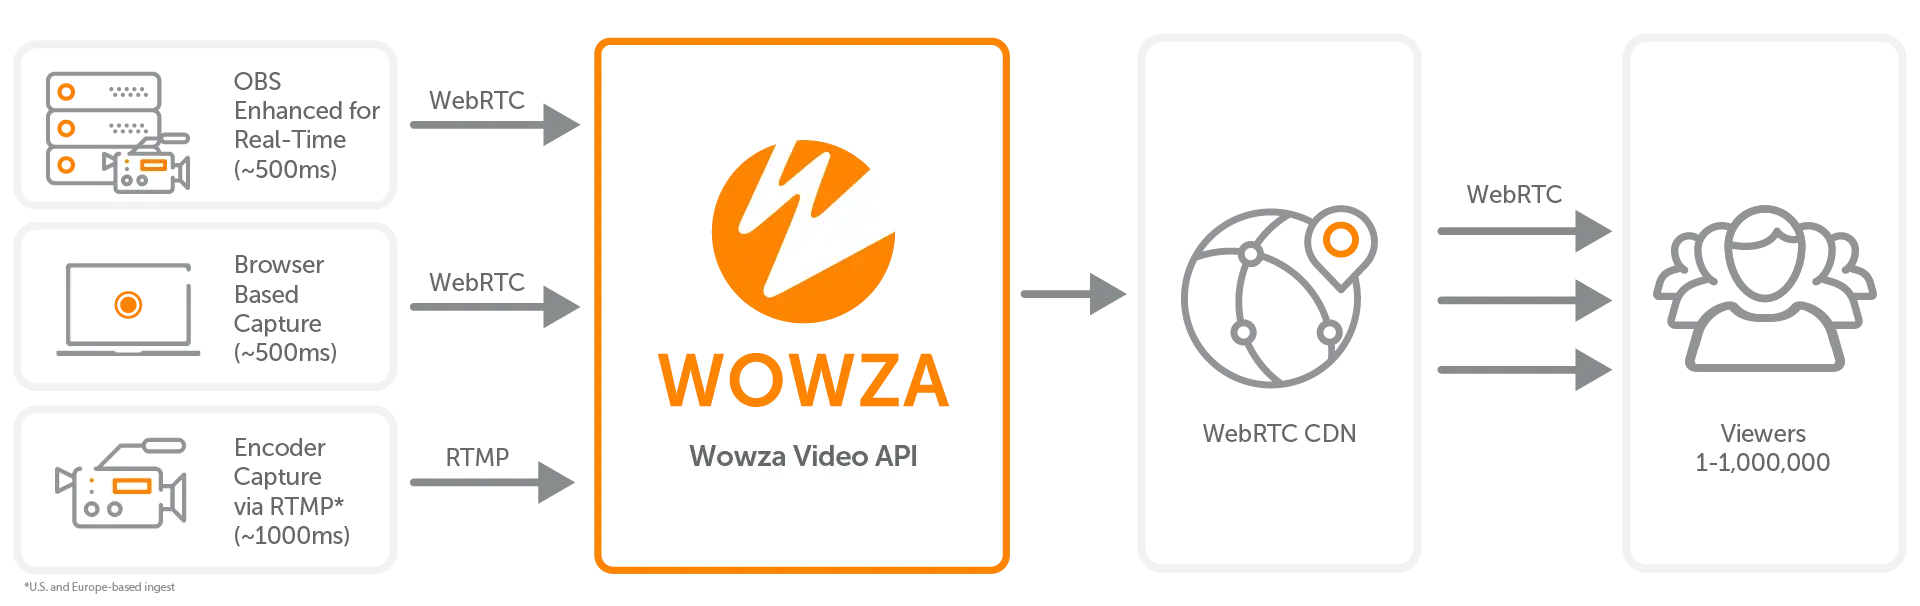 A workflow showing Real-Time Streaming at Scale for Wowza Video